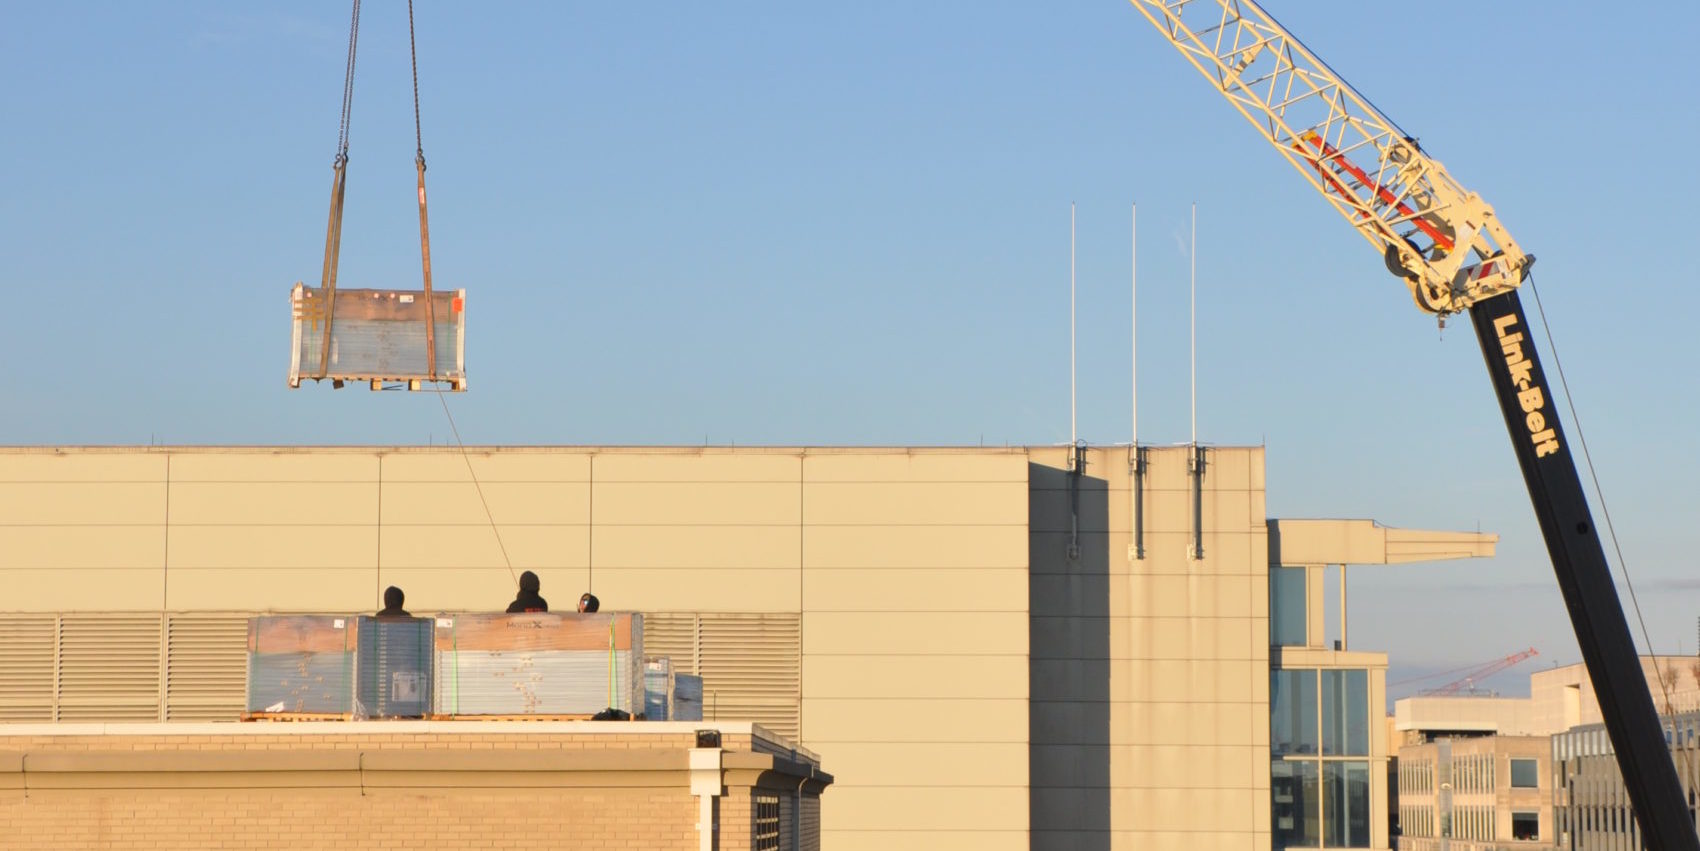 Three people are standing behind panels packages of panels on top of a building. A crate suspended by a crane is above them. Behind them is a building and to the right is the crane. Buildings are in the backdrop on the right and there is a clear, bright sky.